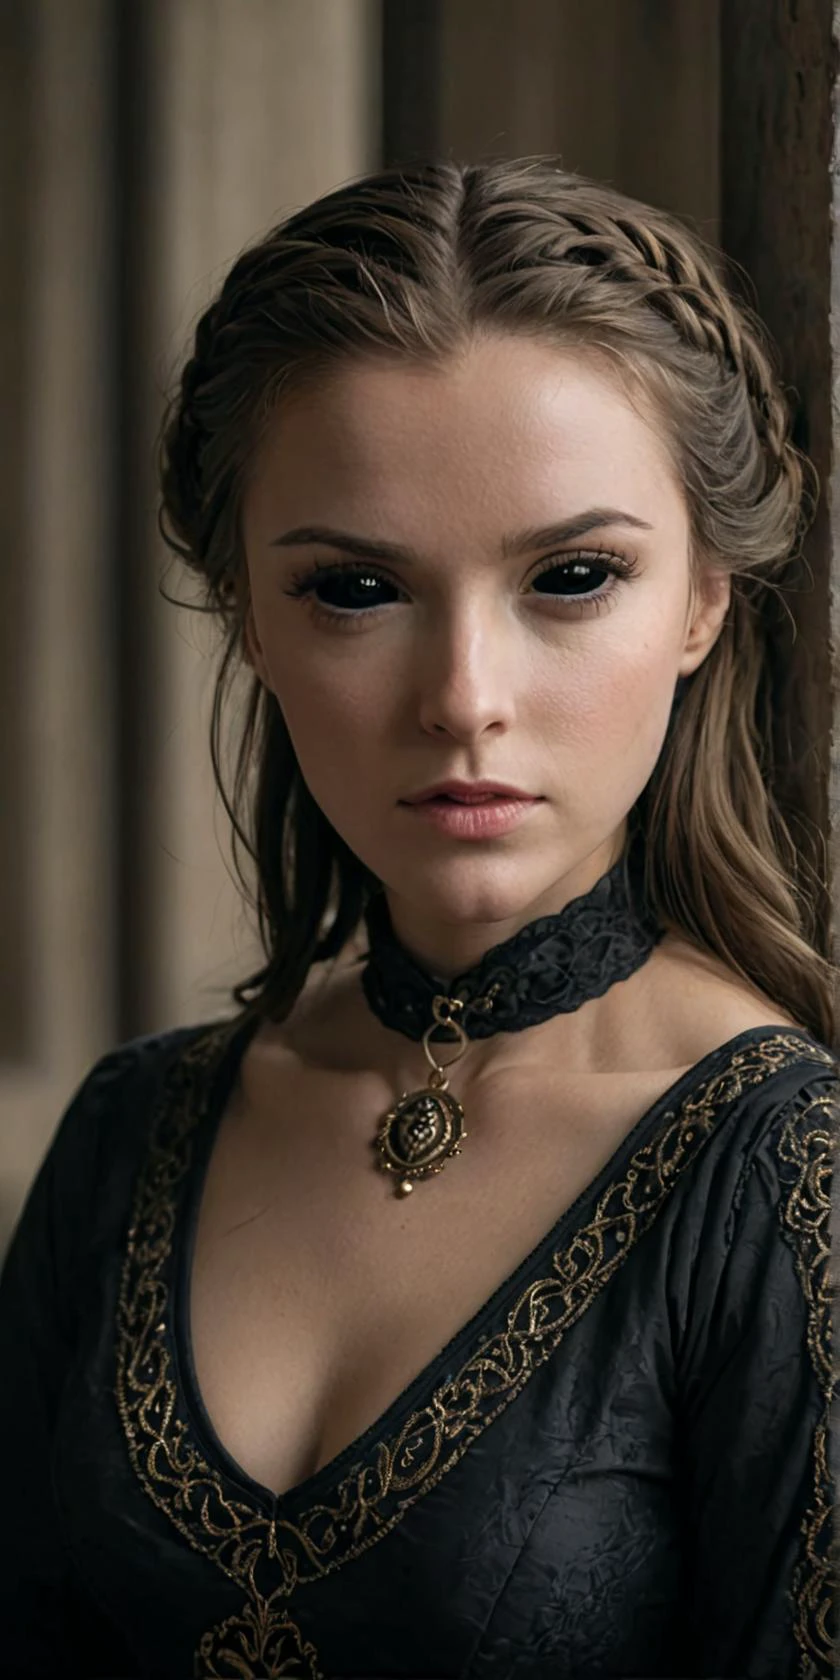 (sharp focus cinematic dramatic 8k photo high quality:1.1),
portrait of a cute woman with black sclera eyes wearing a medieval dress